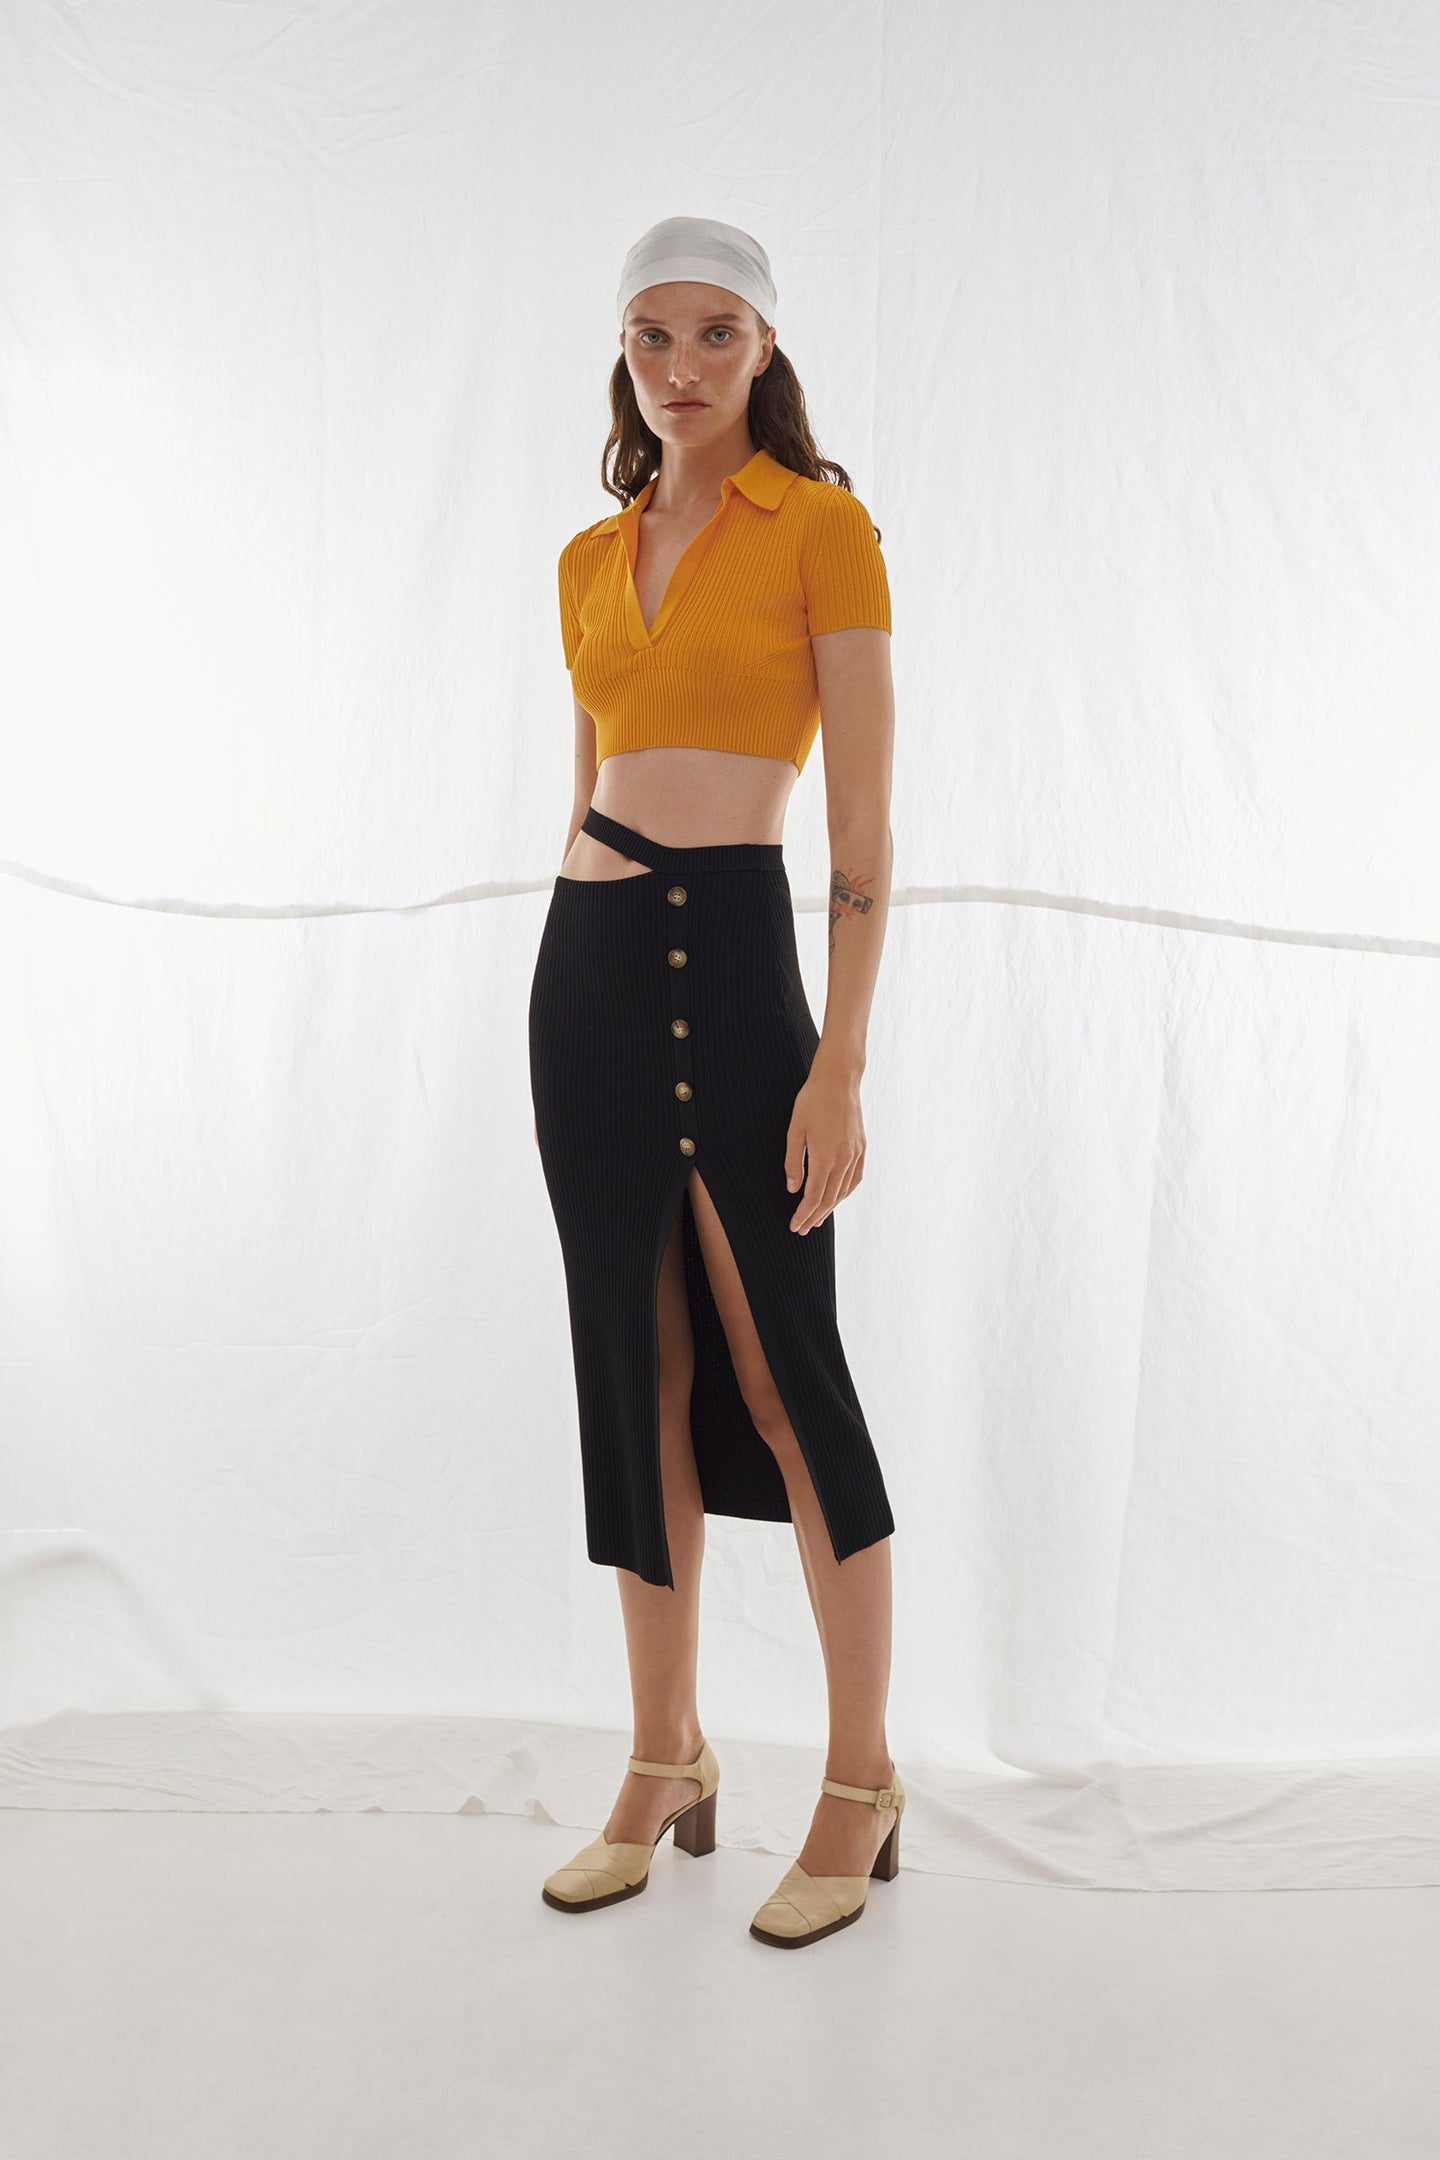 This Amy midi skirt is Anna October’s view on a plain midi skirt. This one has a graceful cut-out on the waist that underlines its tenderness. The sophisticated slit makes the whole look very tempting yet elegant.